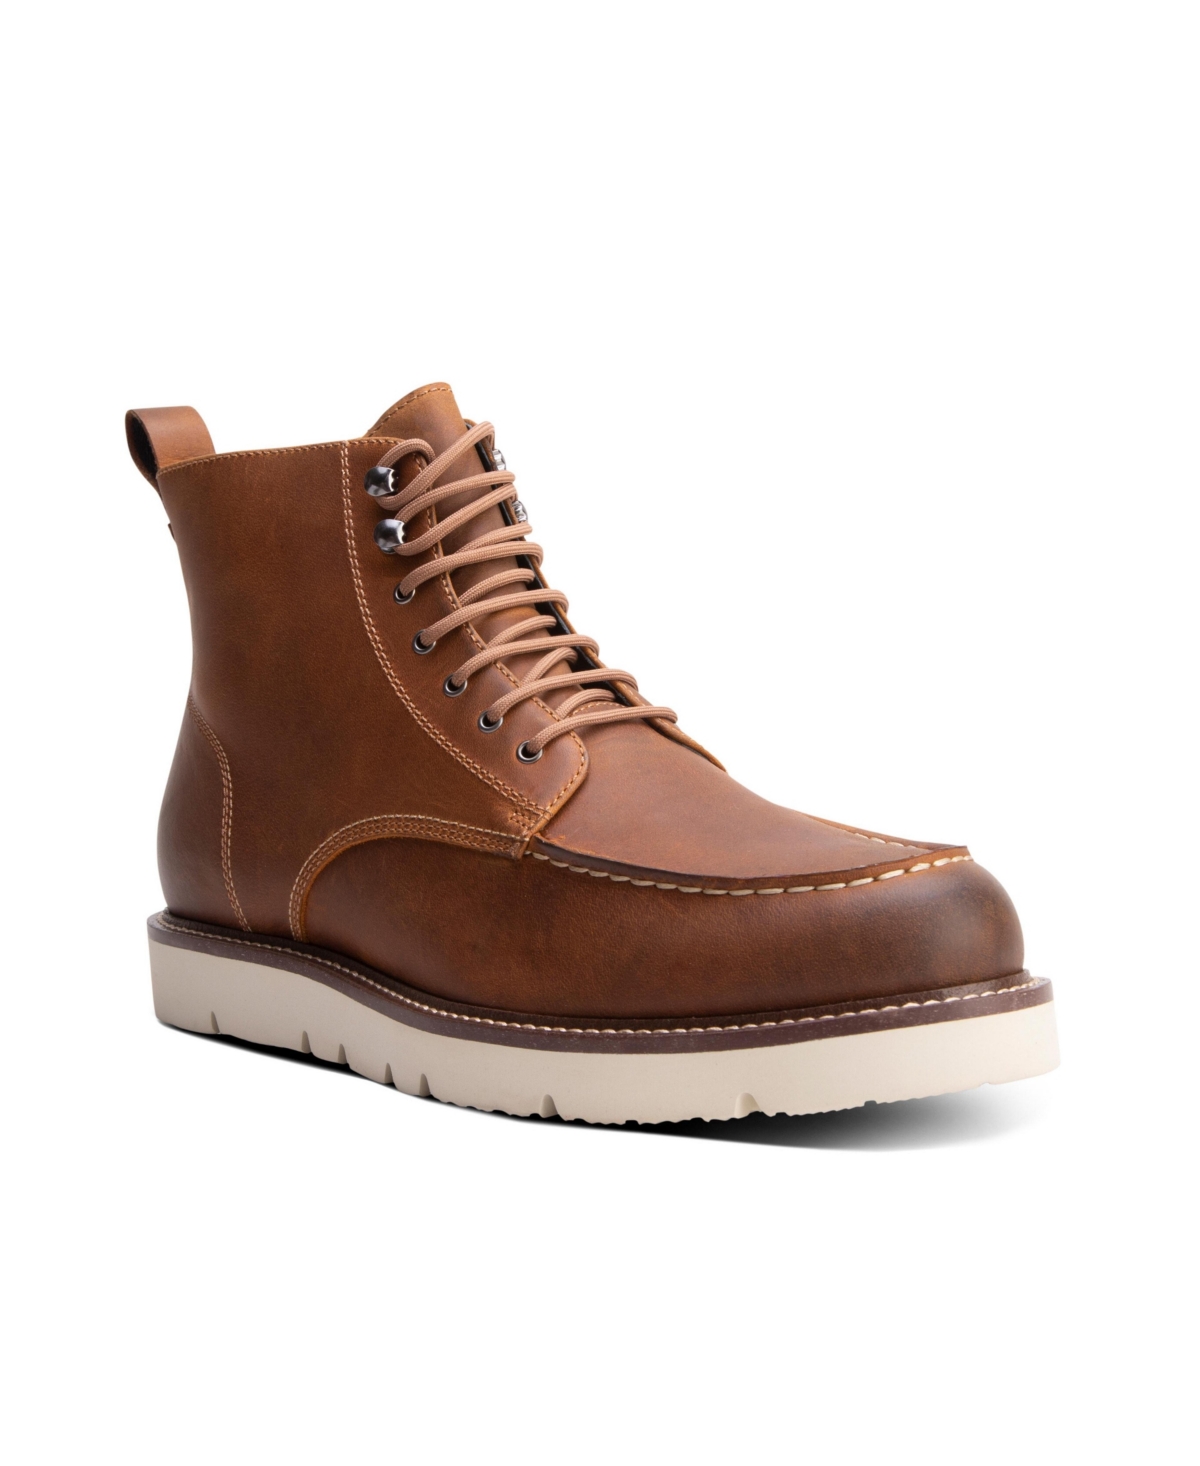 BLAKE MCKAY MEN'S GREENWOOD CASUAL HYBRID WEDGE MOC-TOE LACE-UP BOOTS